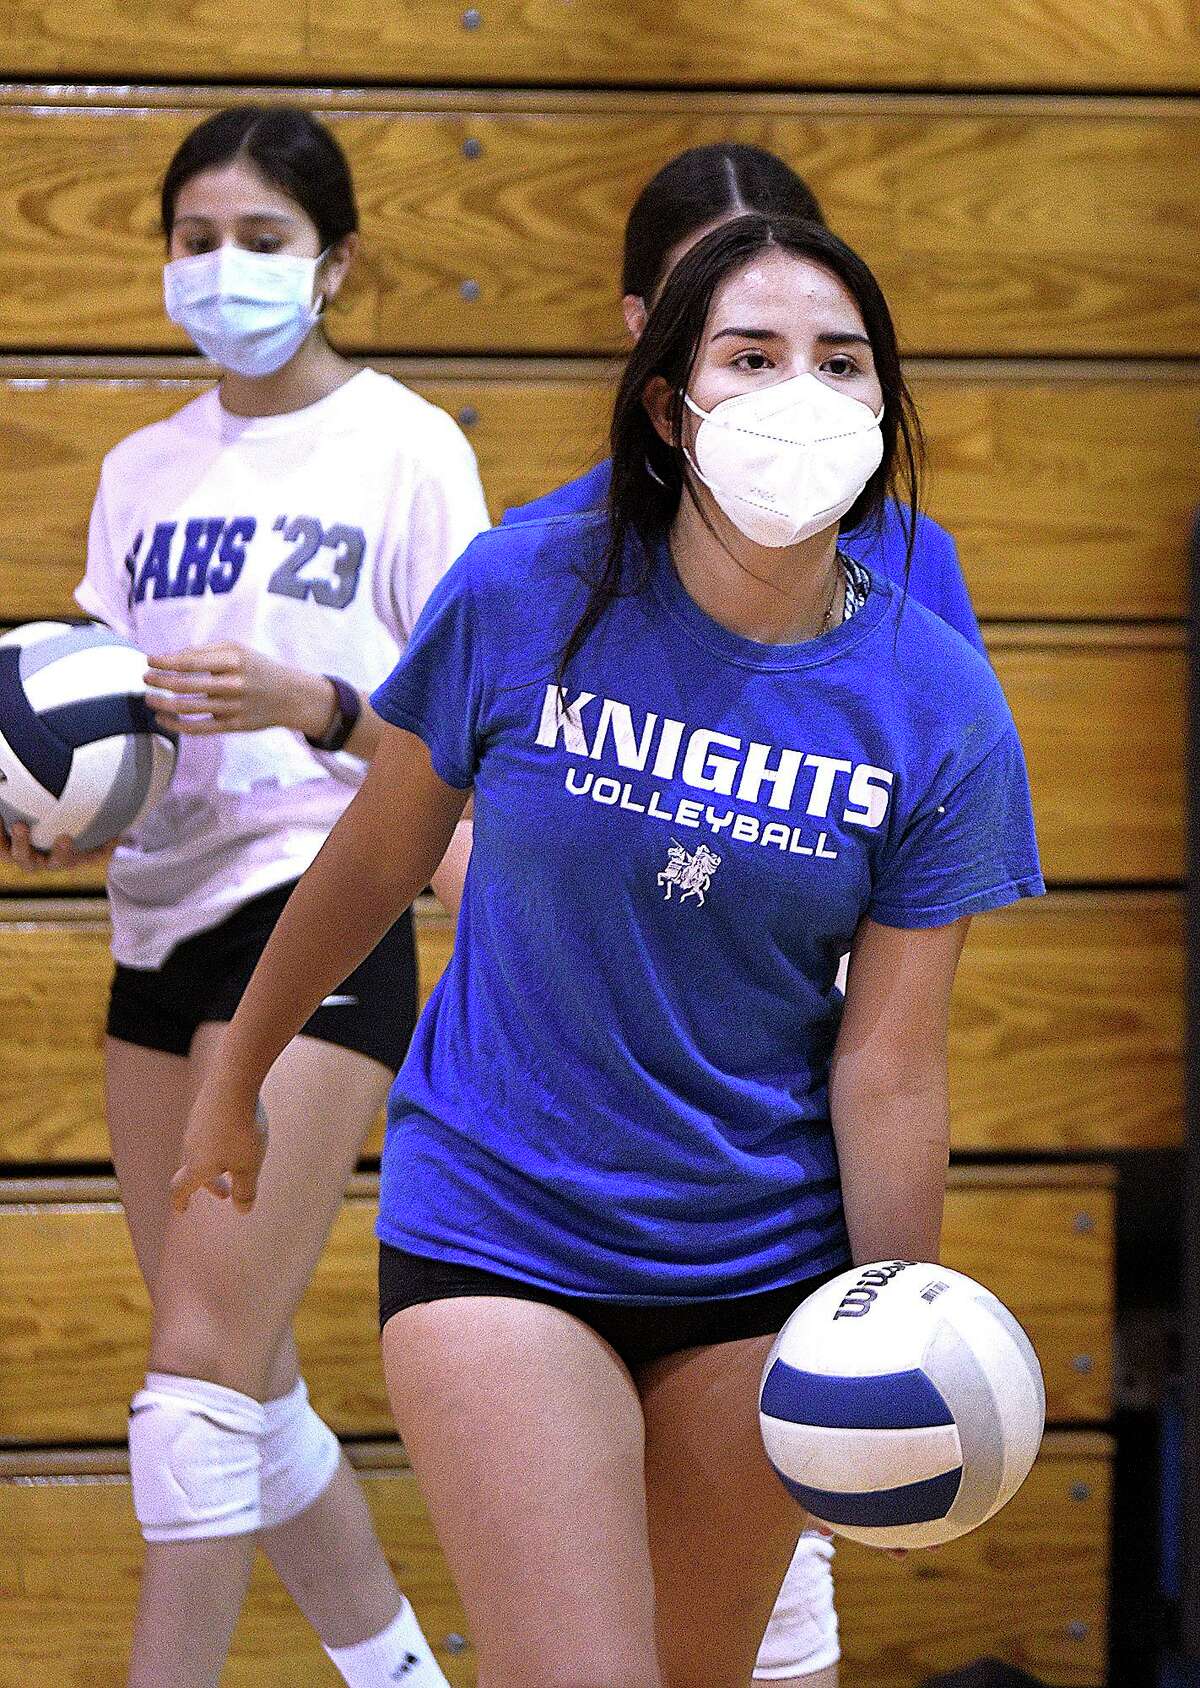 St. Augustine was the first local high school volleyball team to resume in-person activity as it held its first practice on Wednesday, Sept. 9.